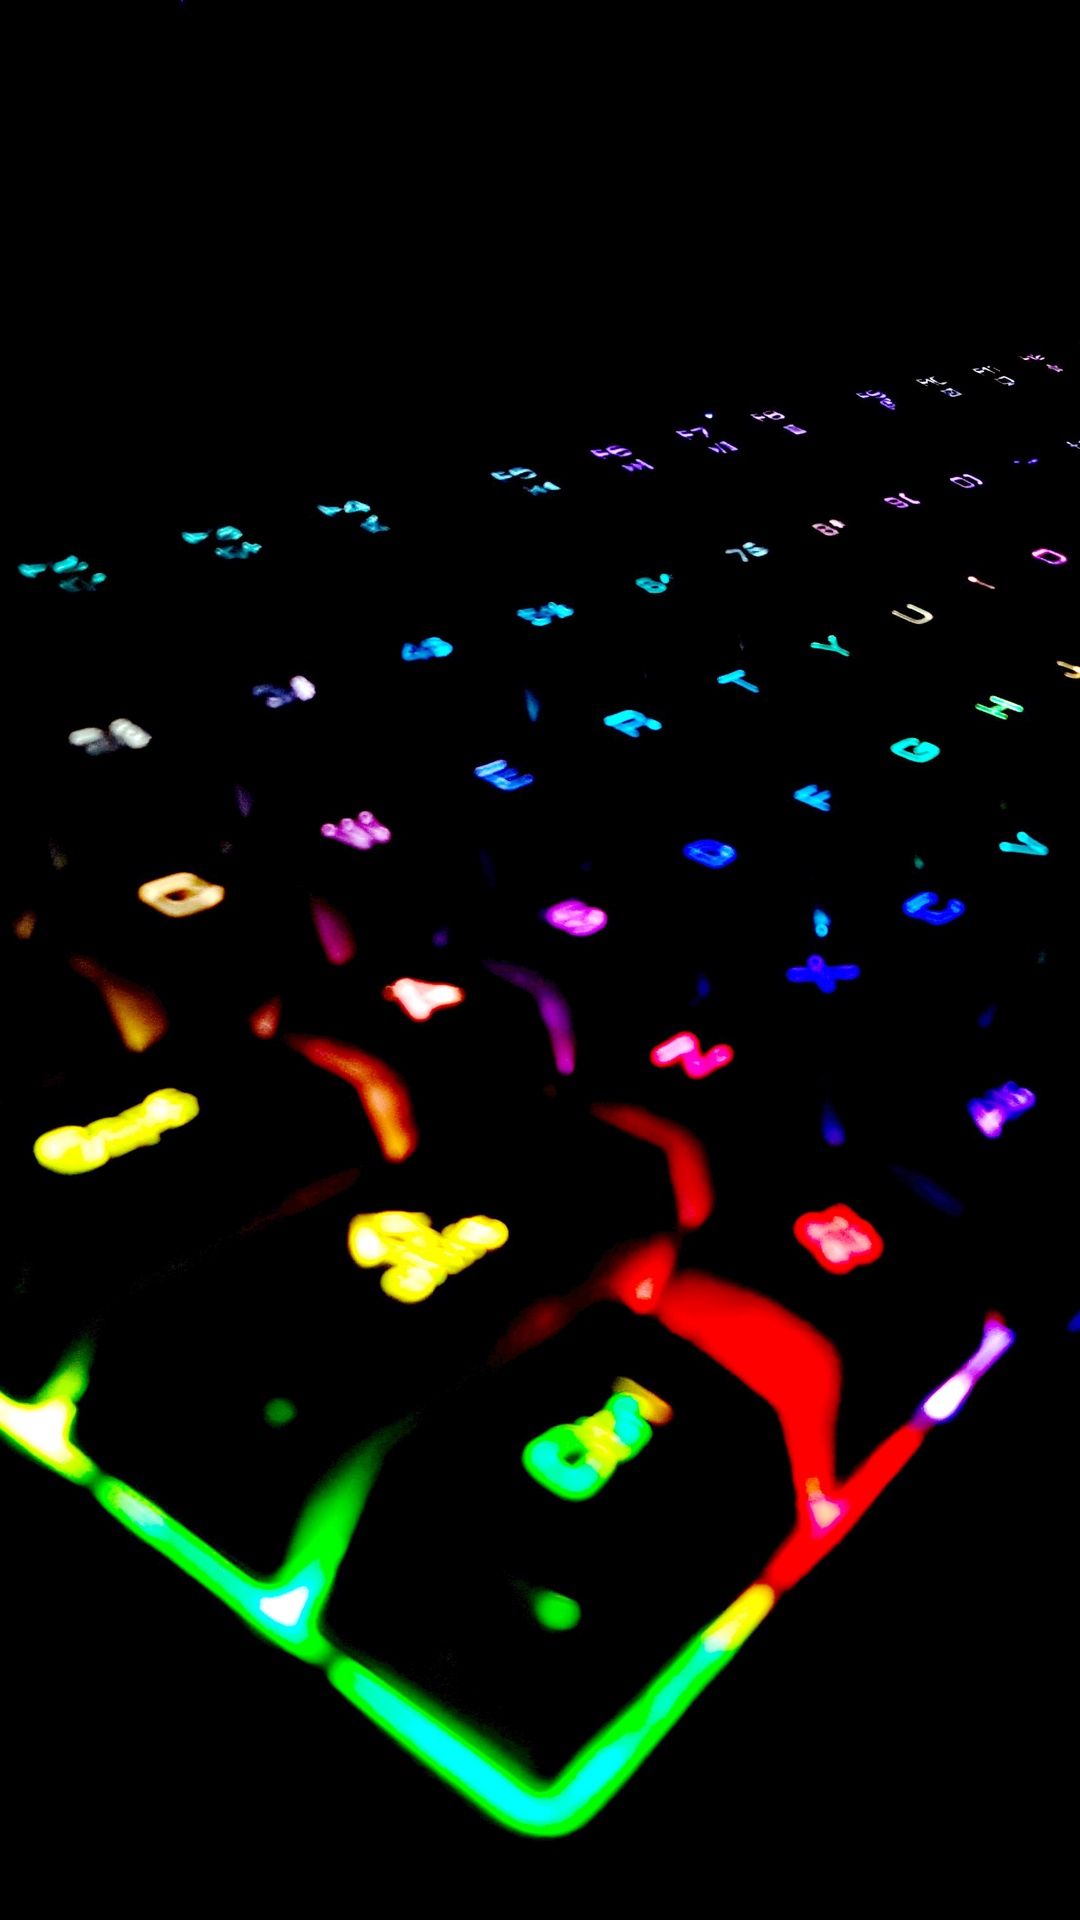 Keyboard And Mouse Wallpaper Wallpaper Popular Keyboard And Mouse Wallpaper Background